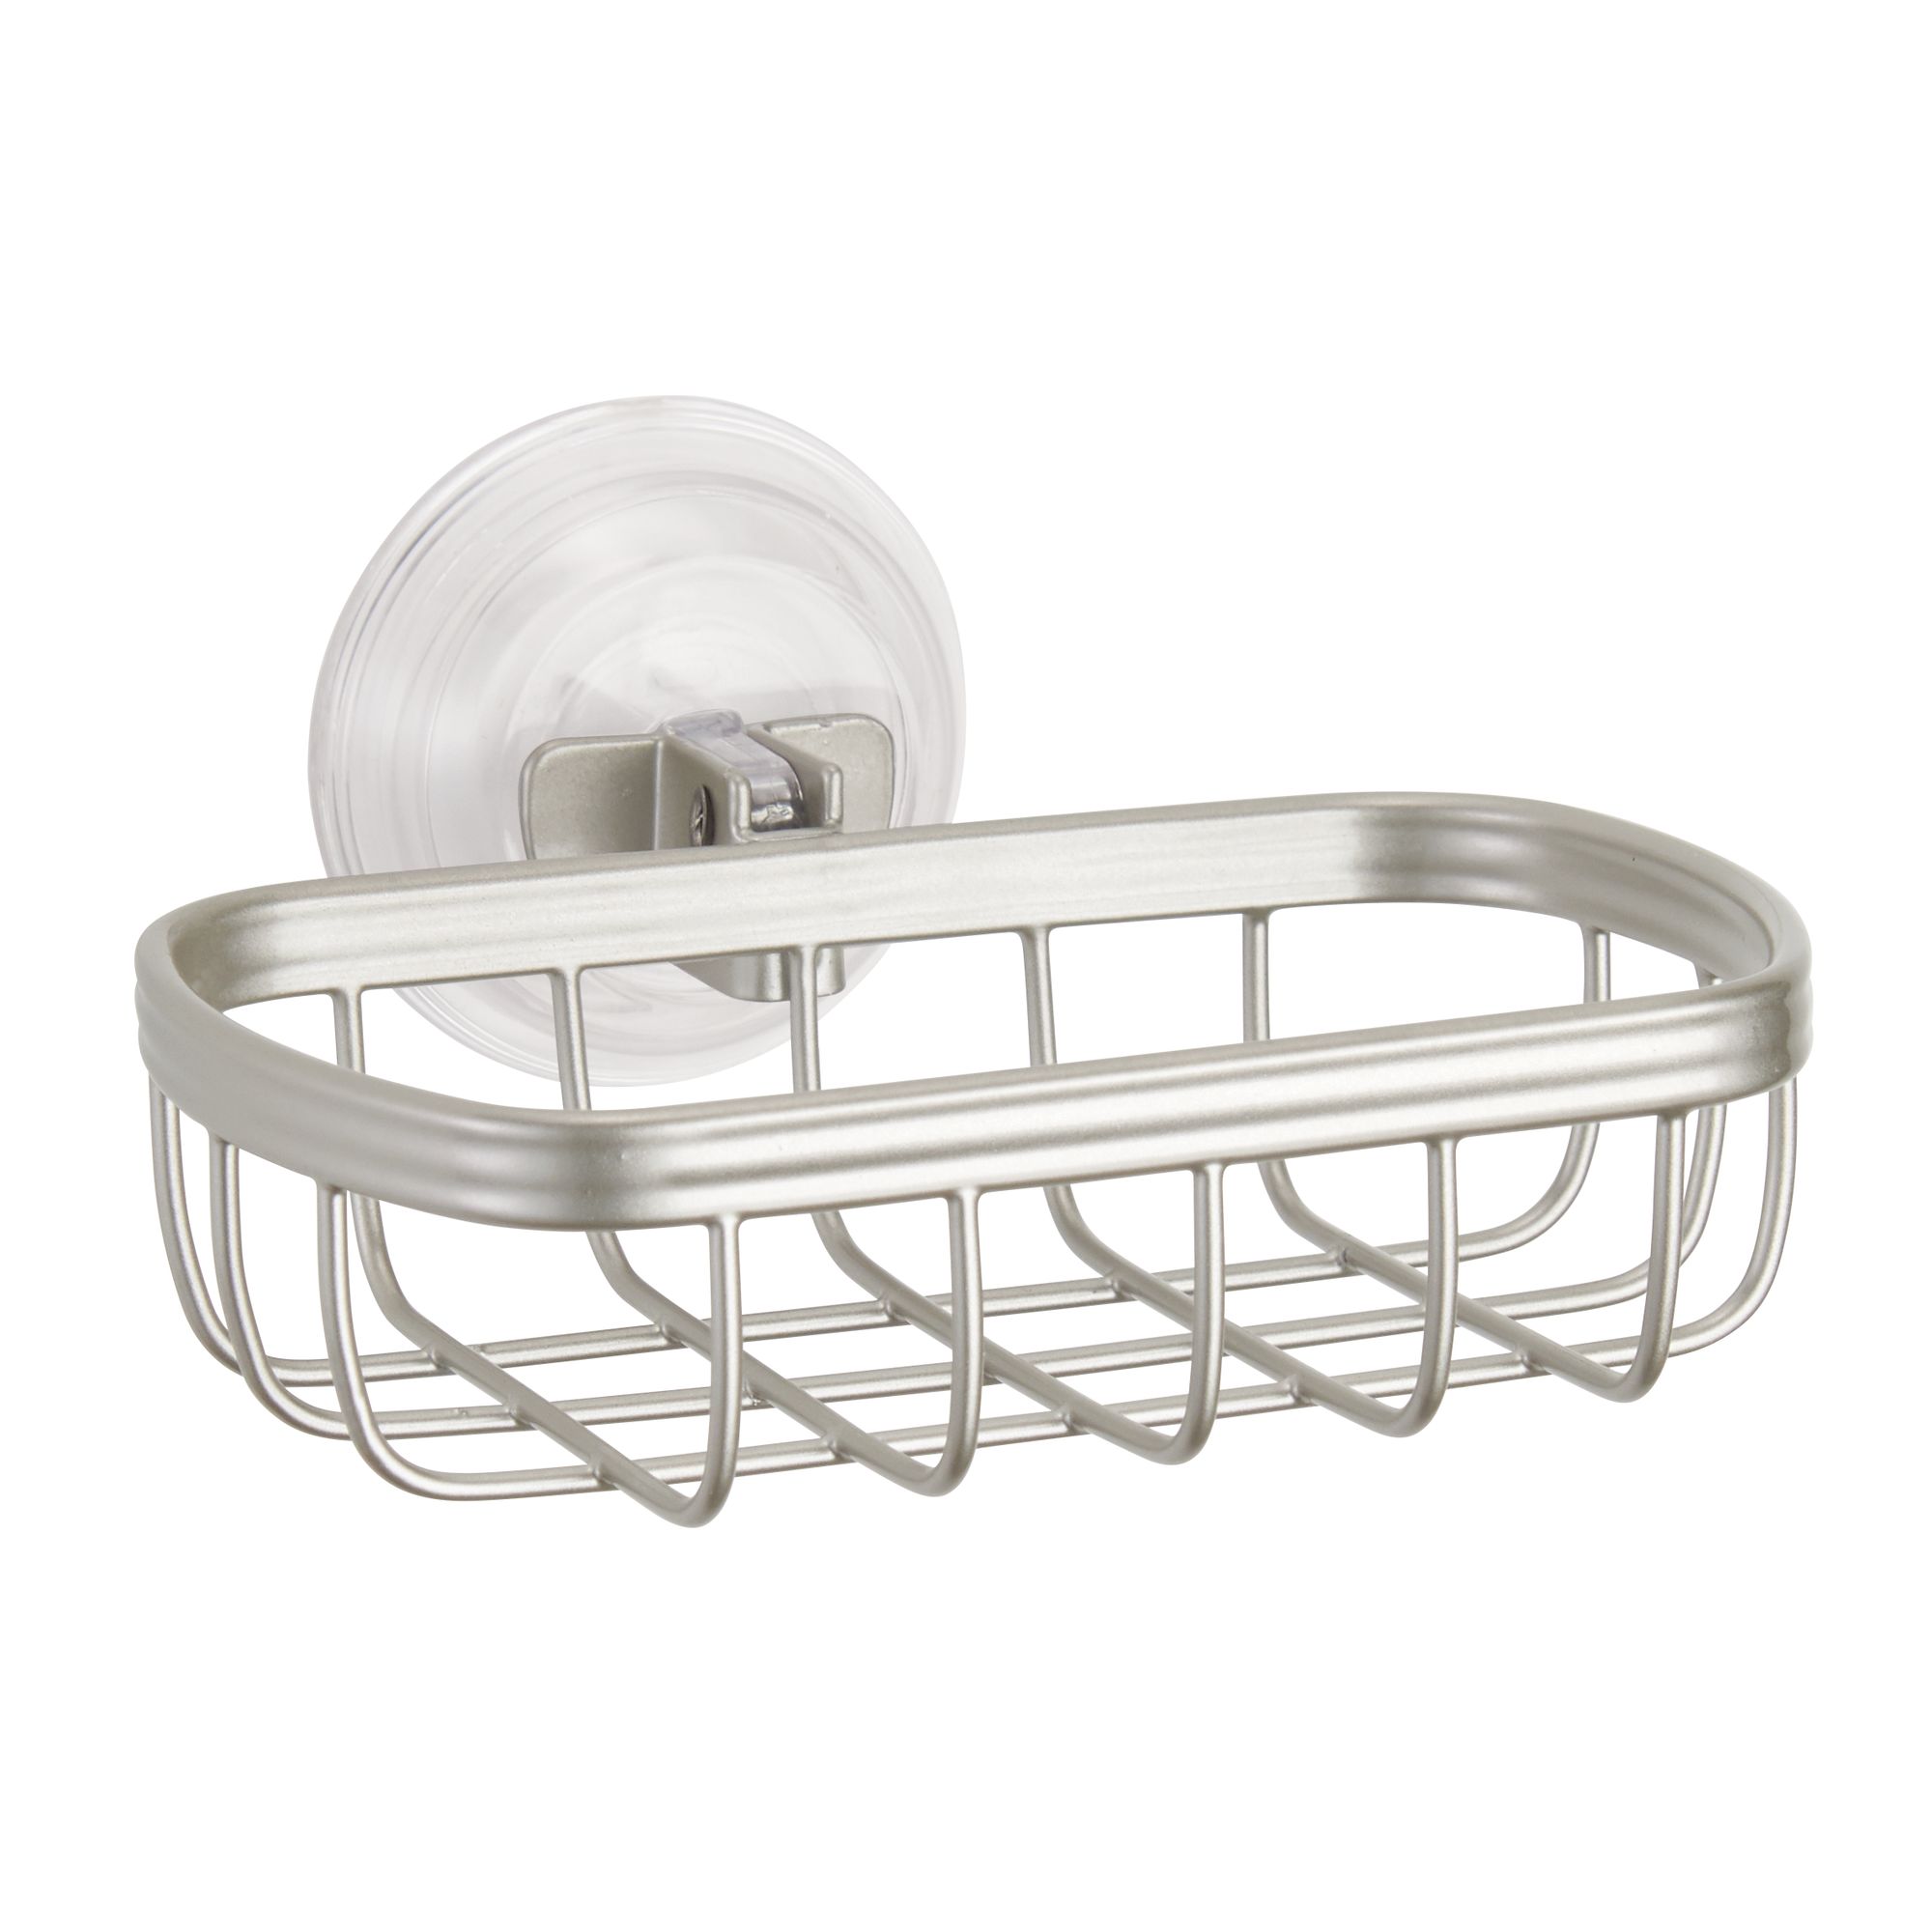 Better Homes & Gardens Silver Steel Suction Cup Soap Holder - image 3 of 4